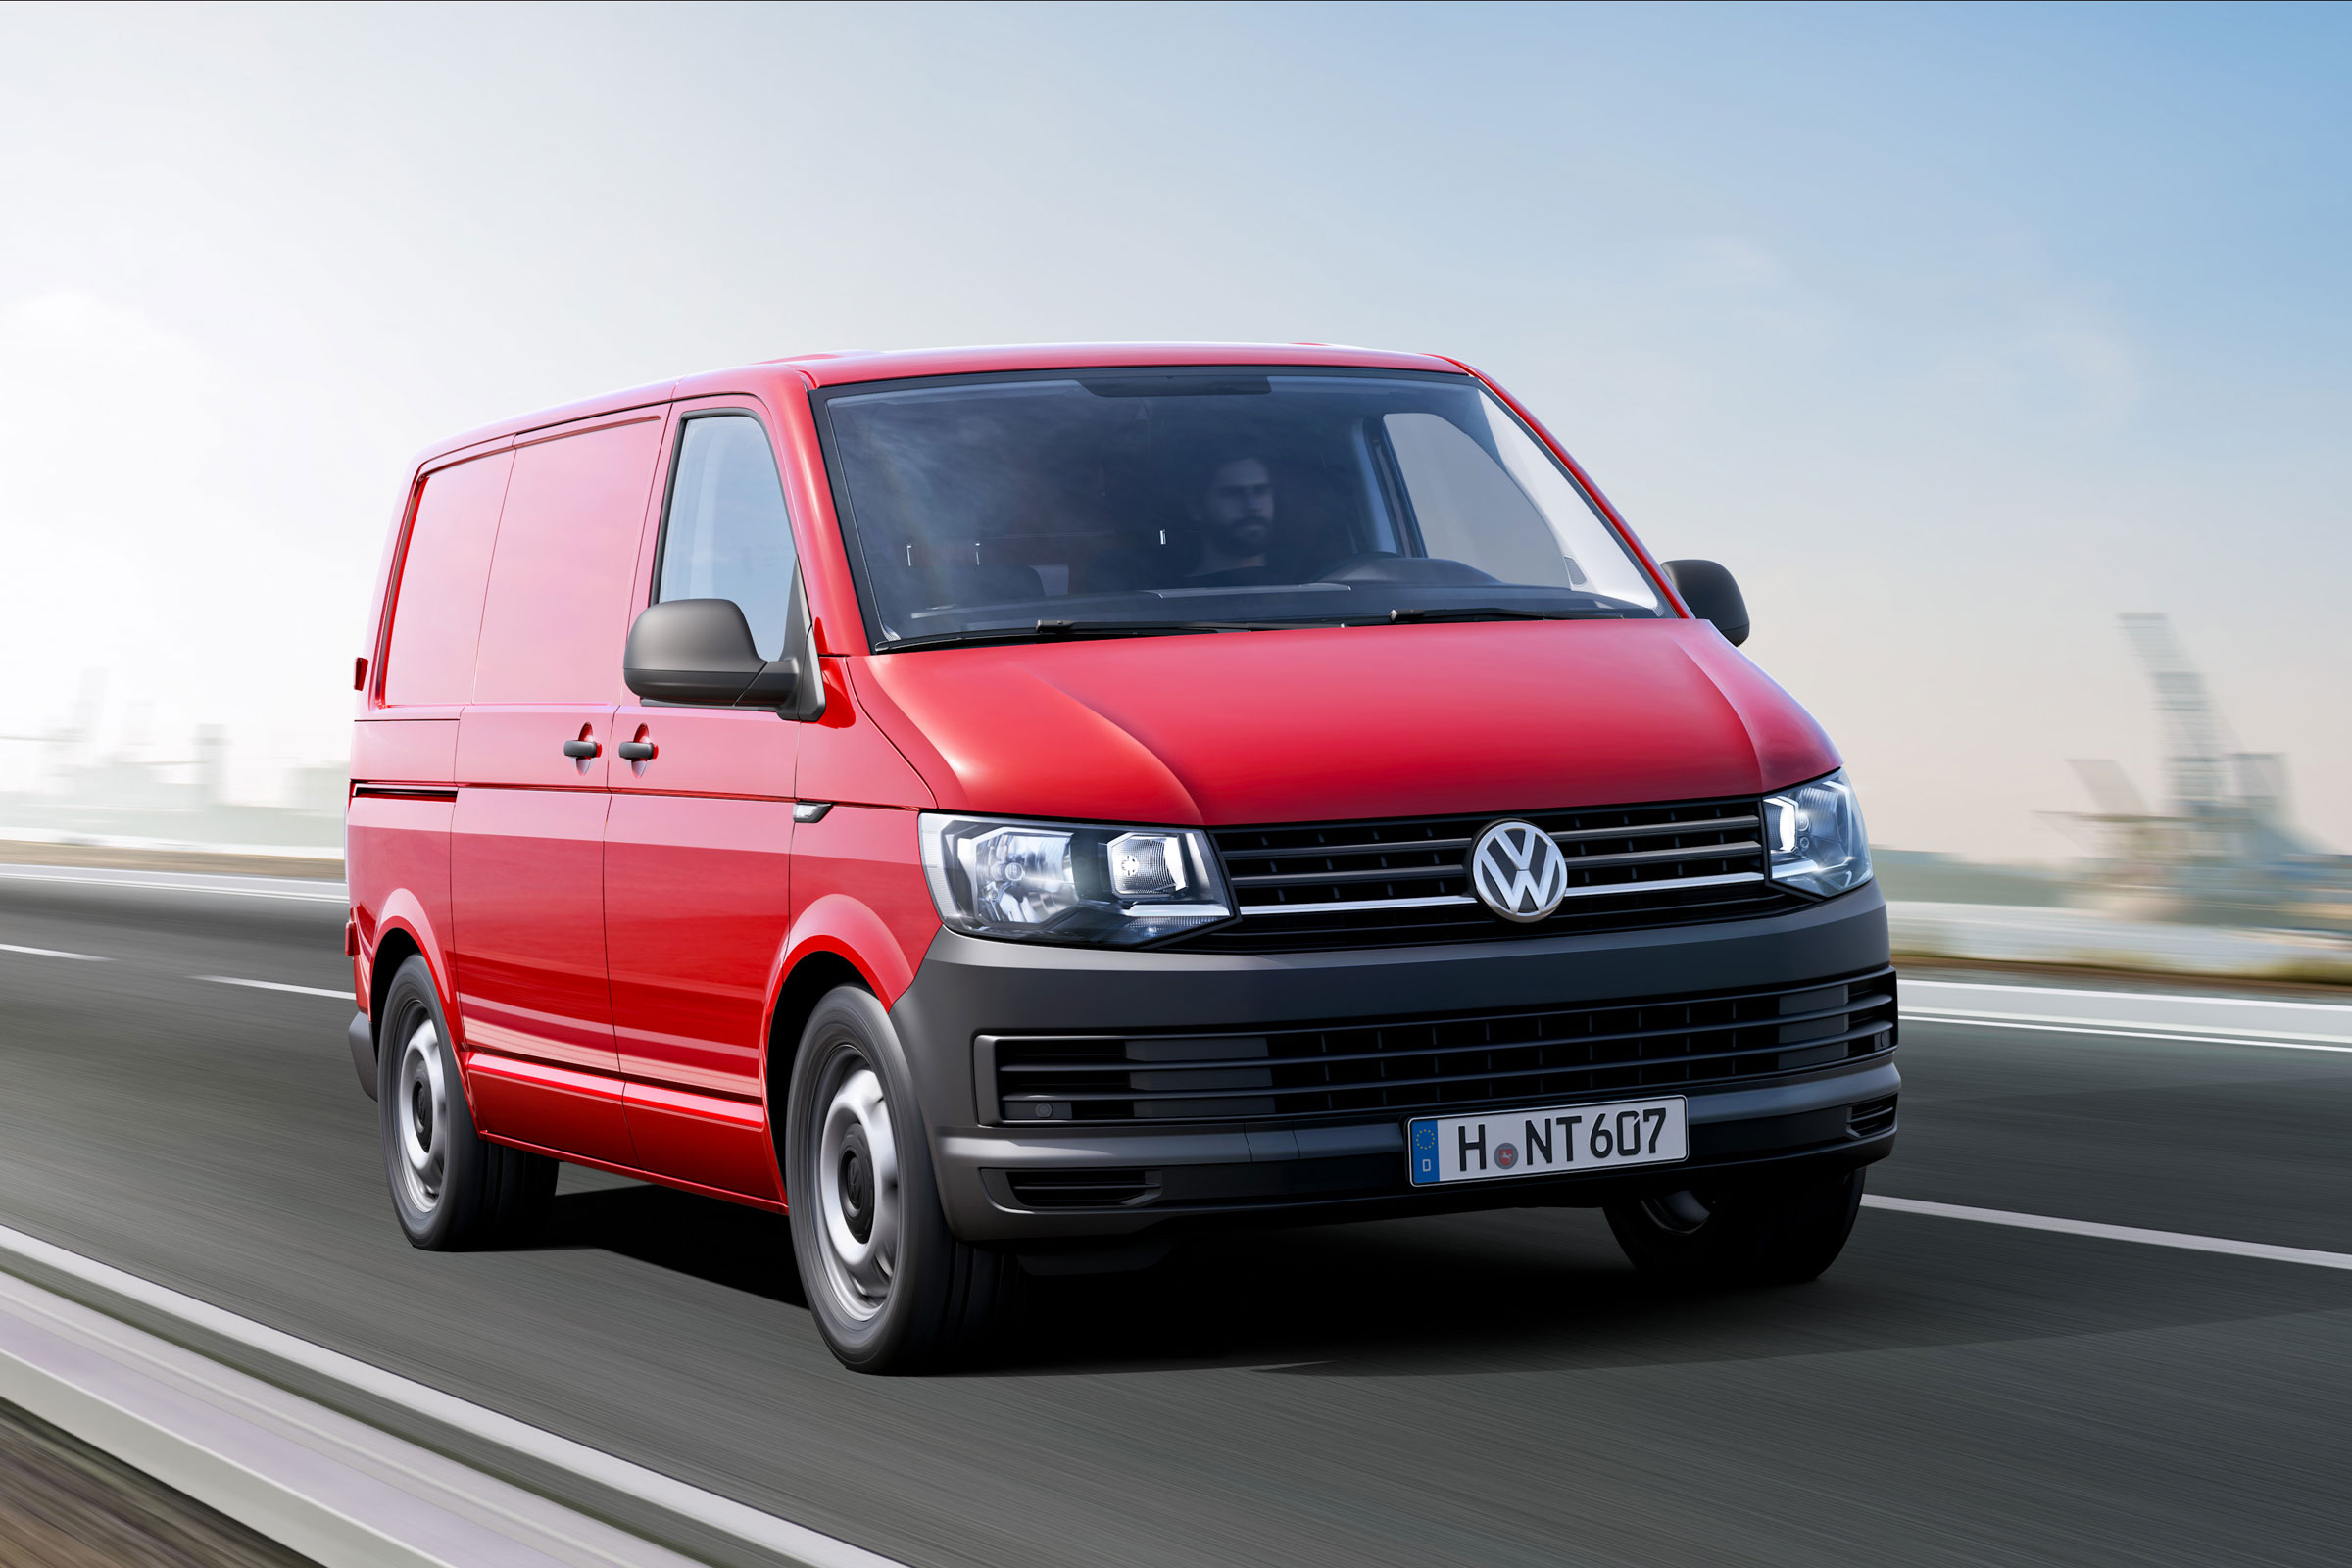 2015 VW Transporter: full pricing and 